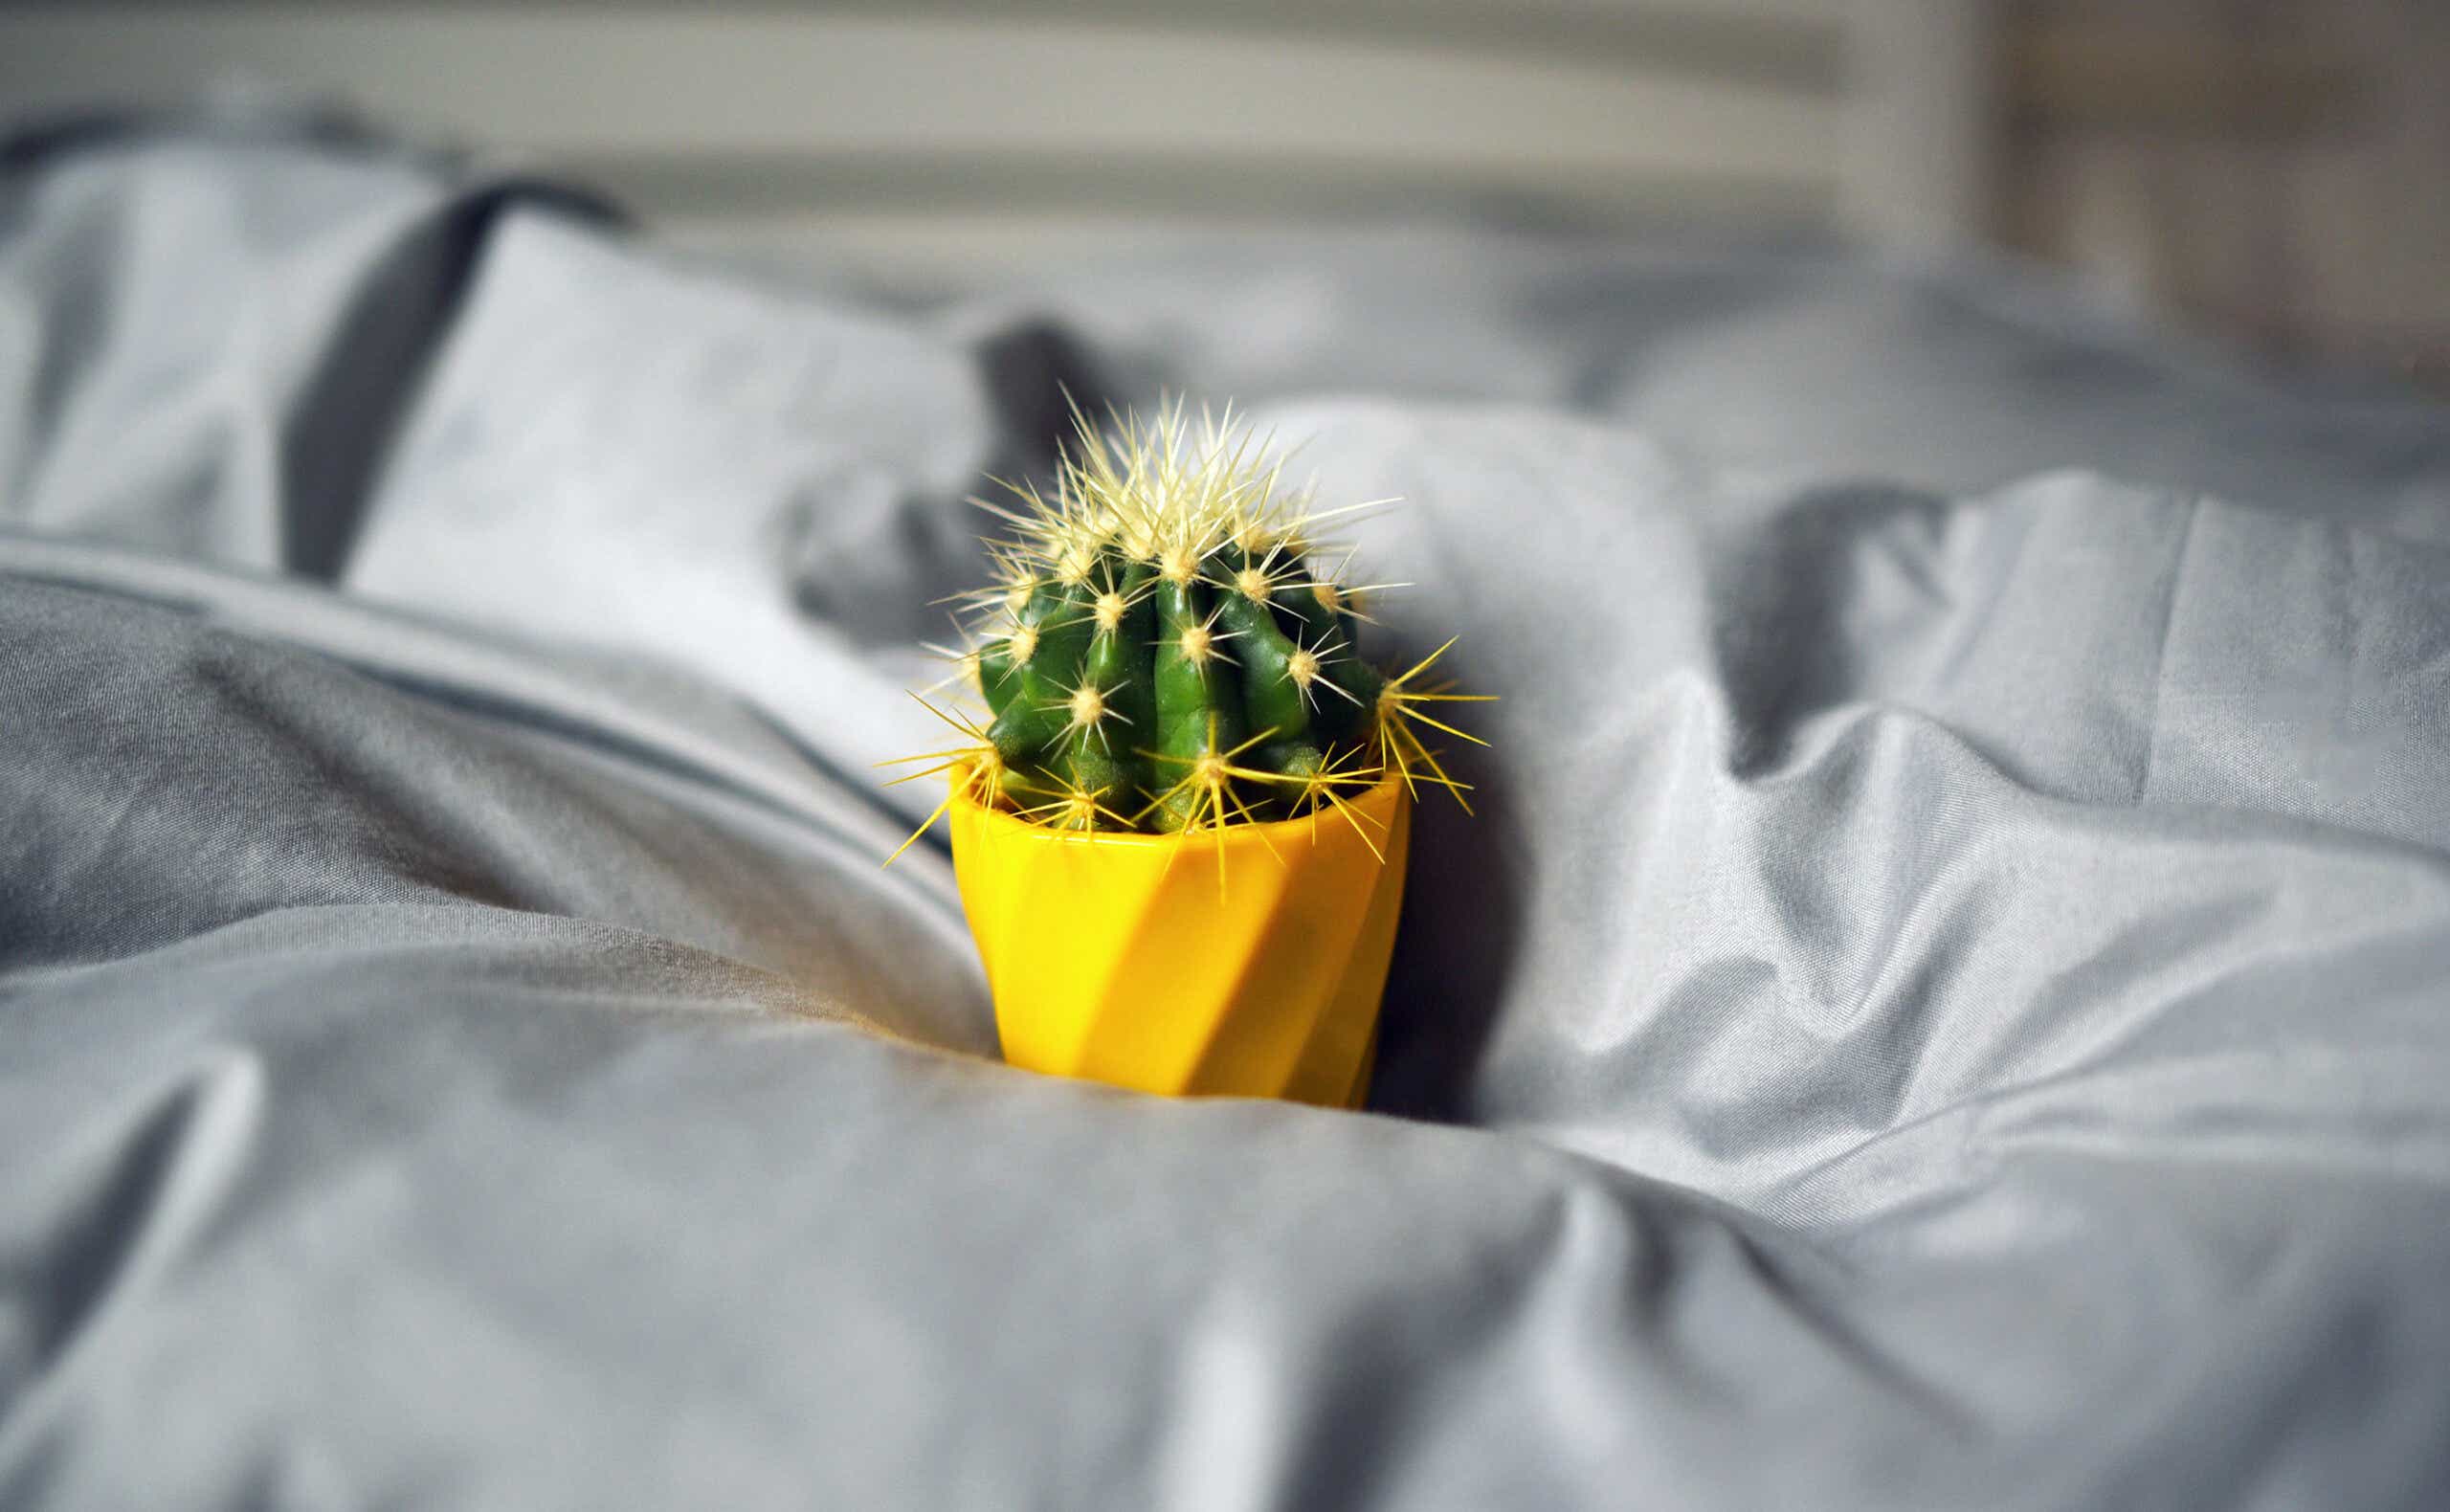 Image of a cactus on a bed